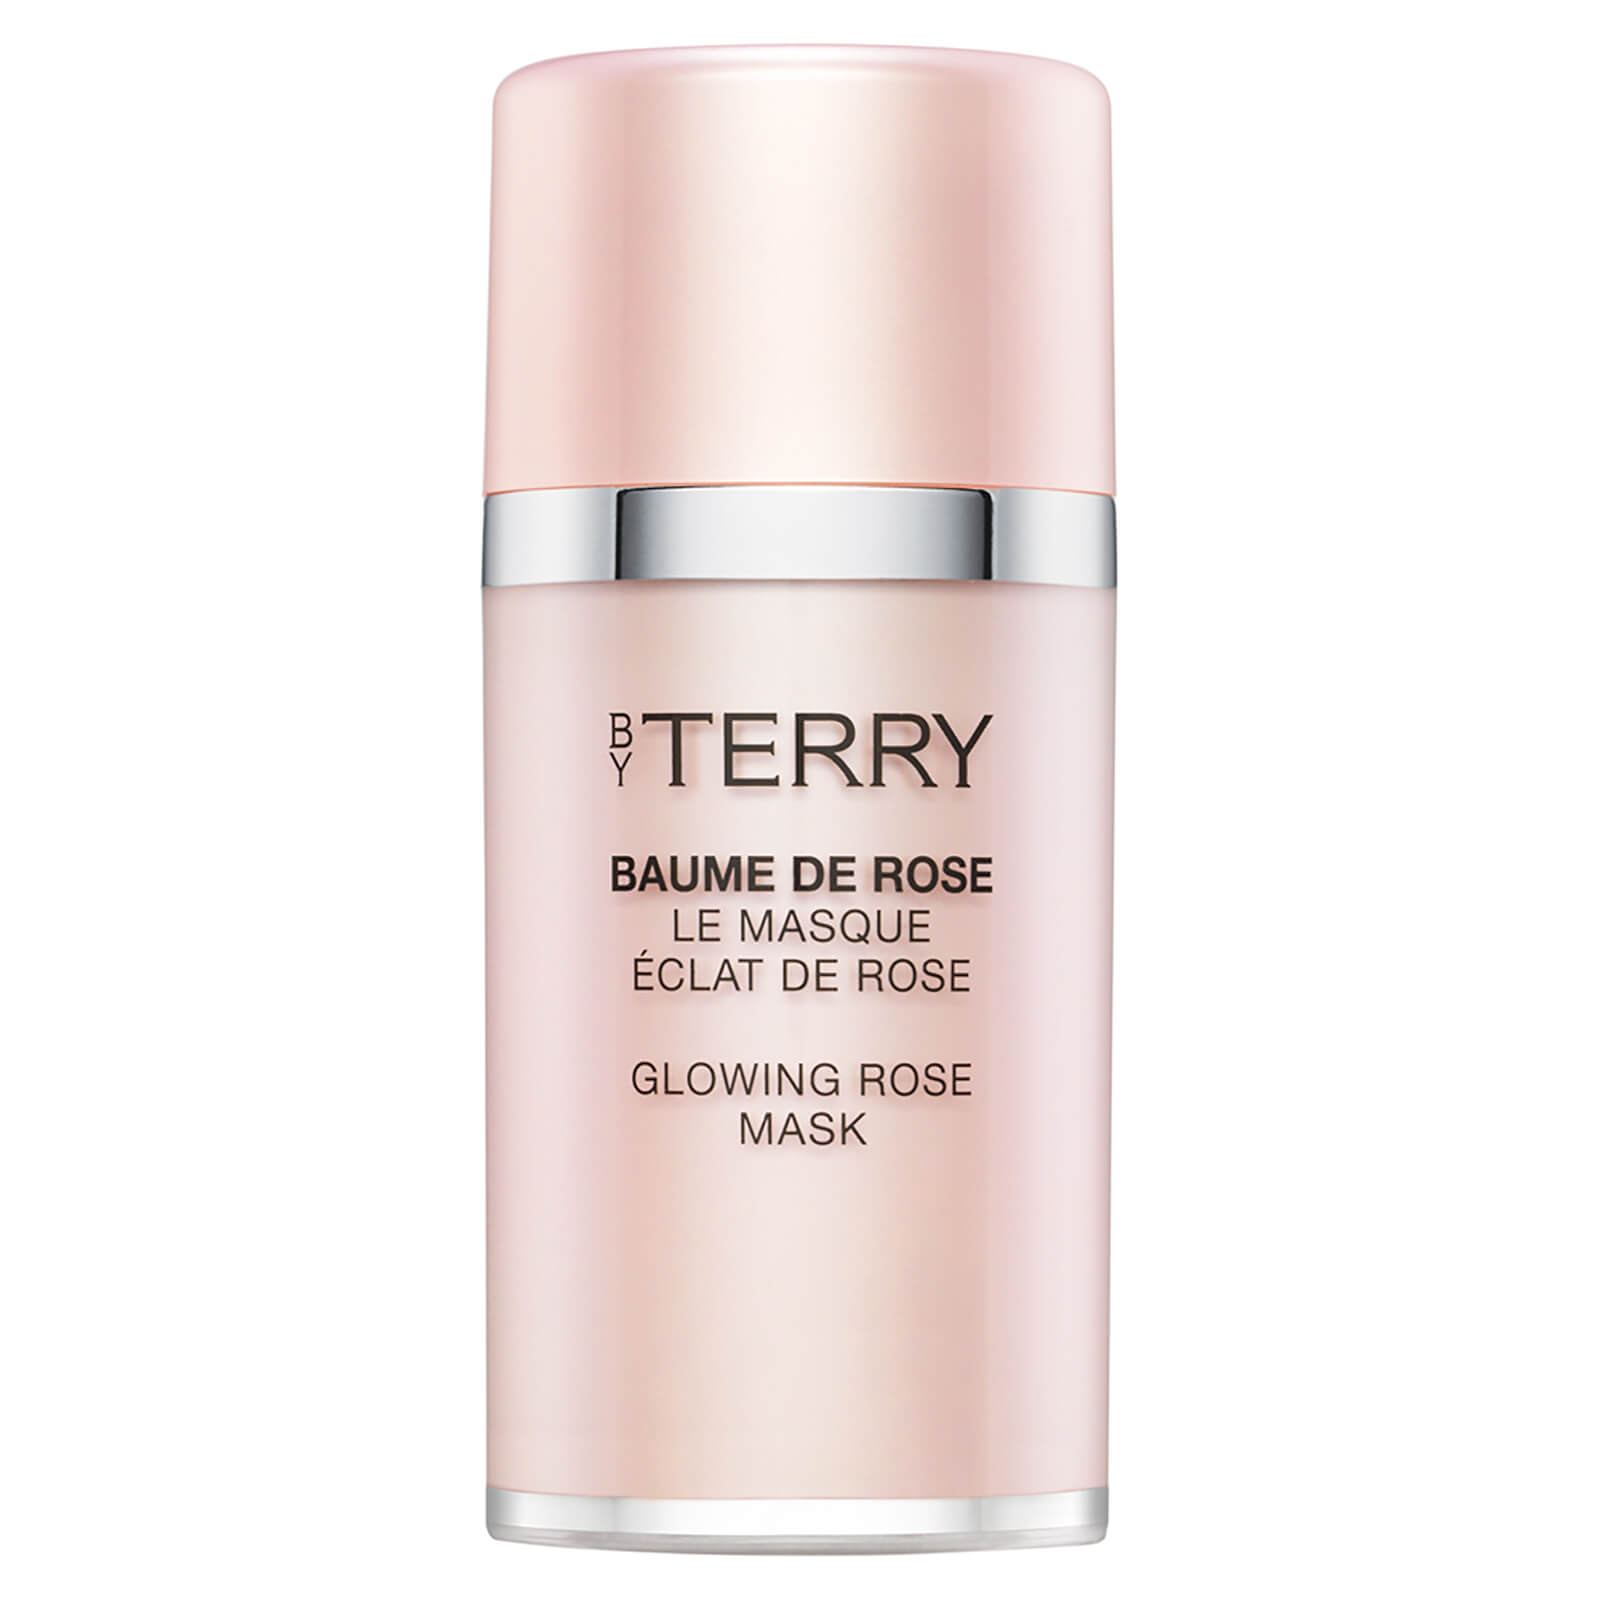 By Terry Baume De Rose Glowing Mask 50g